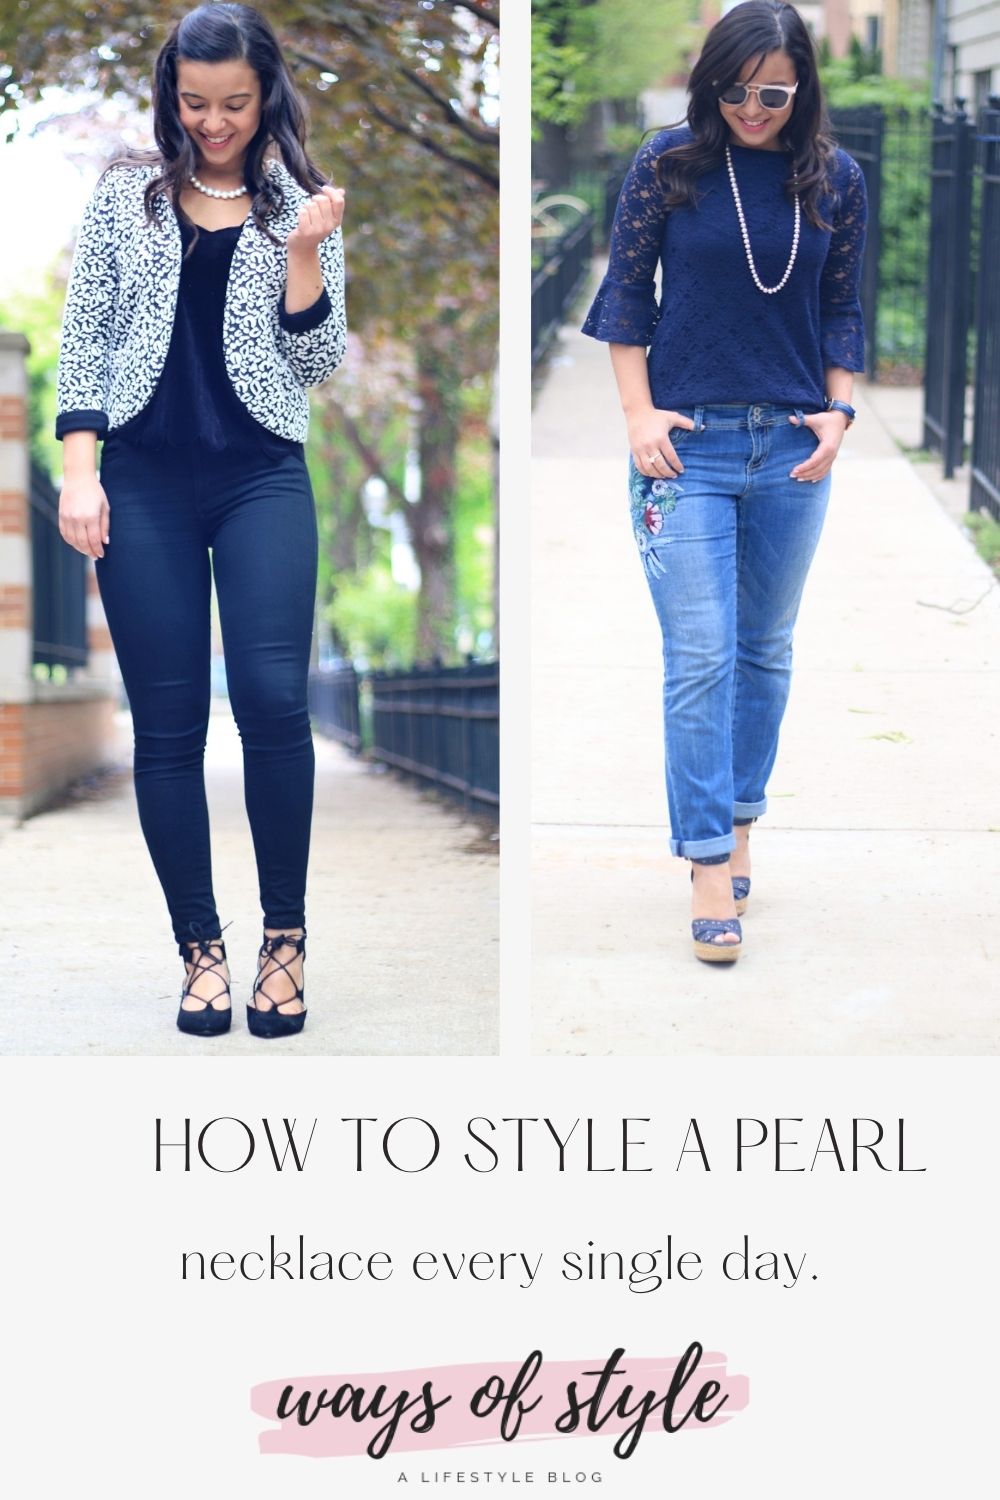 How To Wear Pearls Casually & Often – By Ways of Style